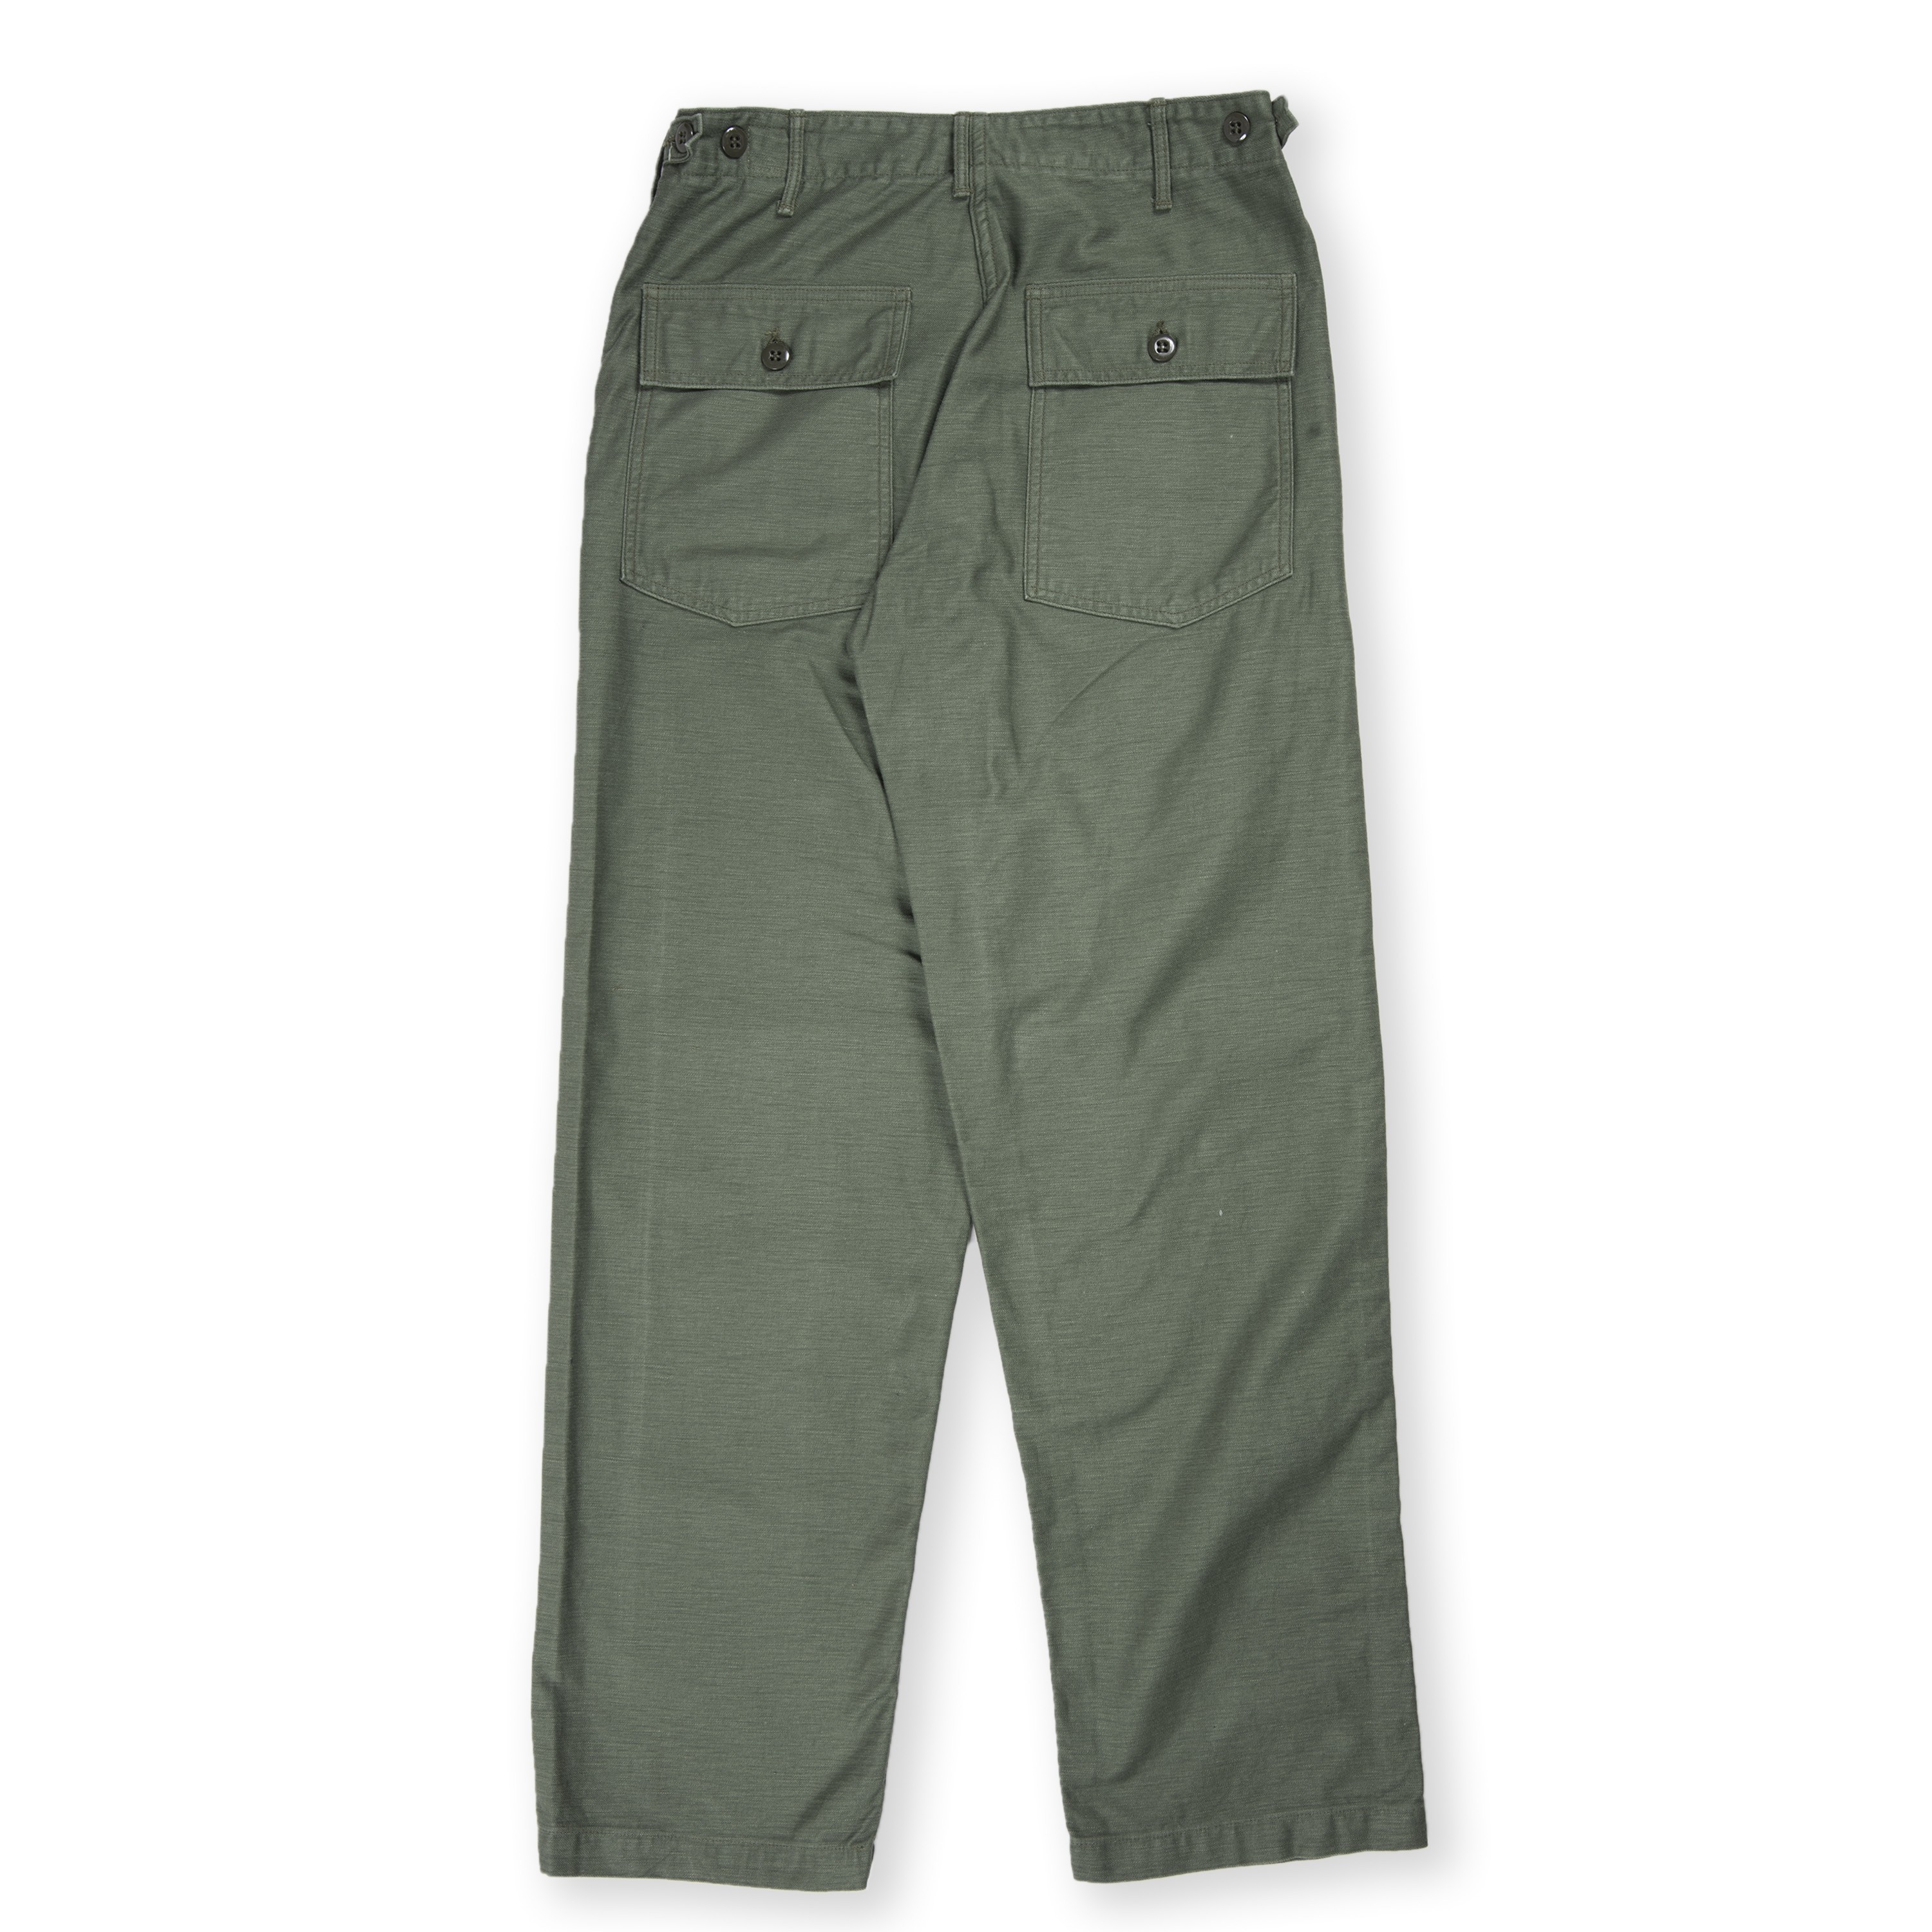 orSlow US Army Fatigue Pant (Green) - Consortium.